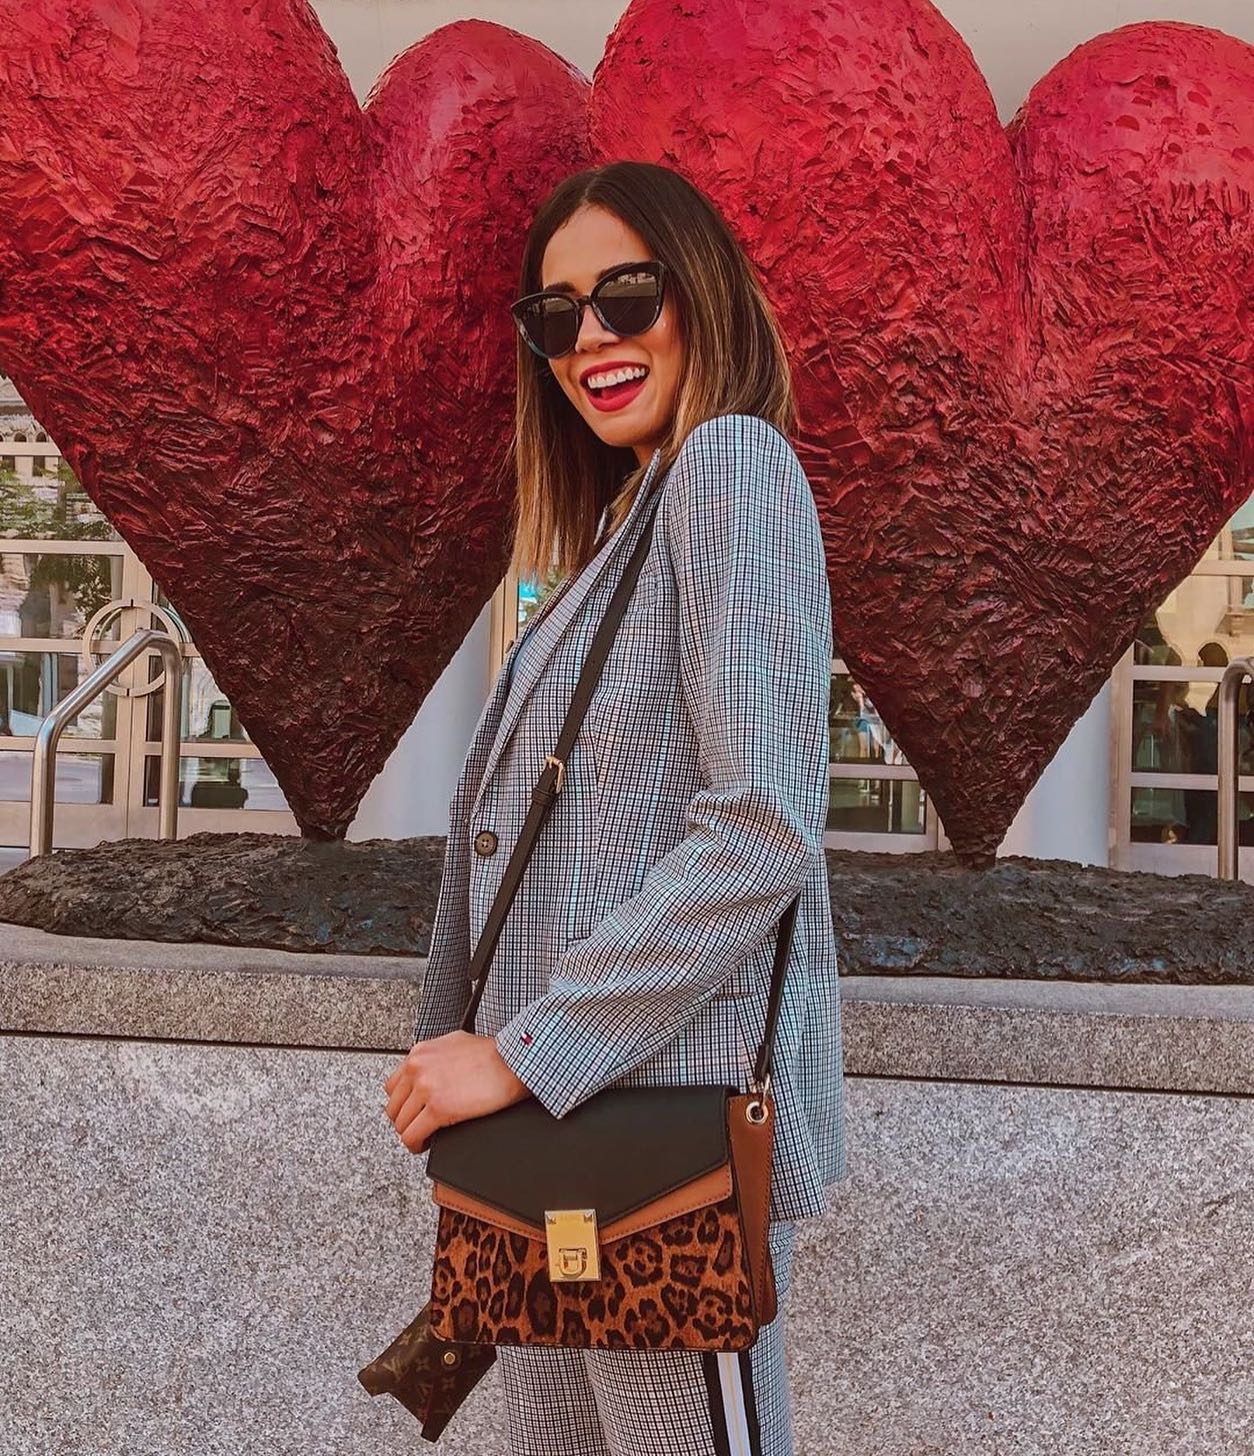 ALDO Shoes on X: Life lesson from our girl crush @luisaferss: “Everything  you do, do it with LOVE!” Shop her handbag:   #bagandbrag #Aldo  / X